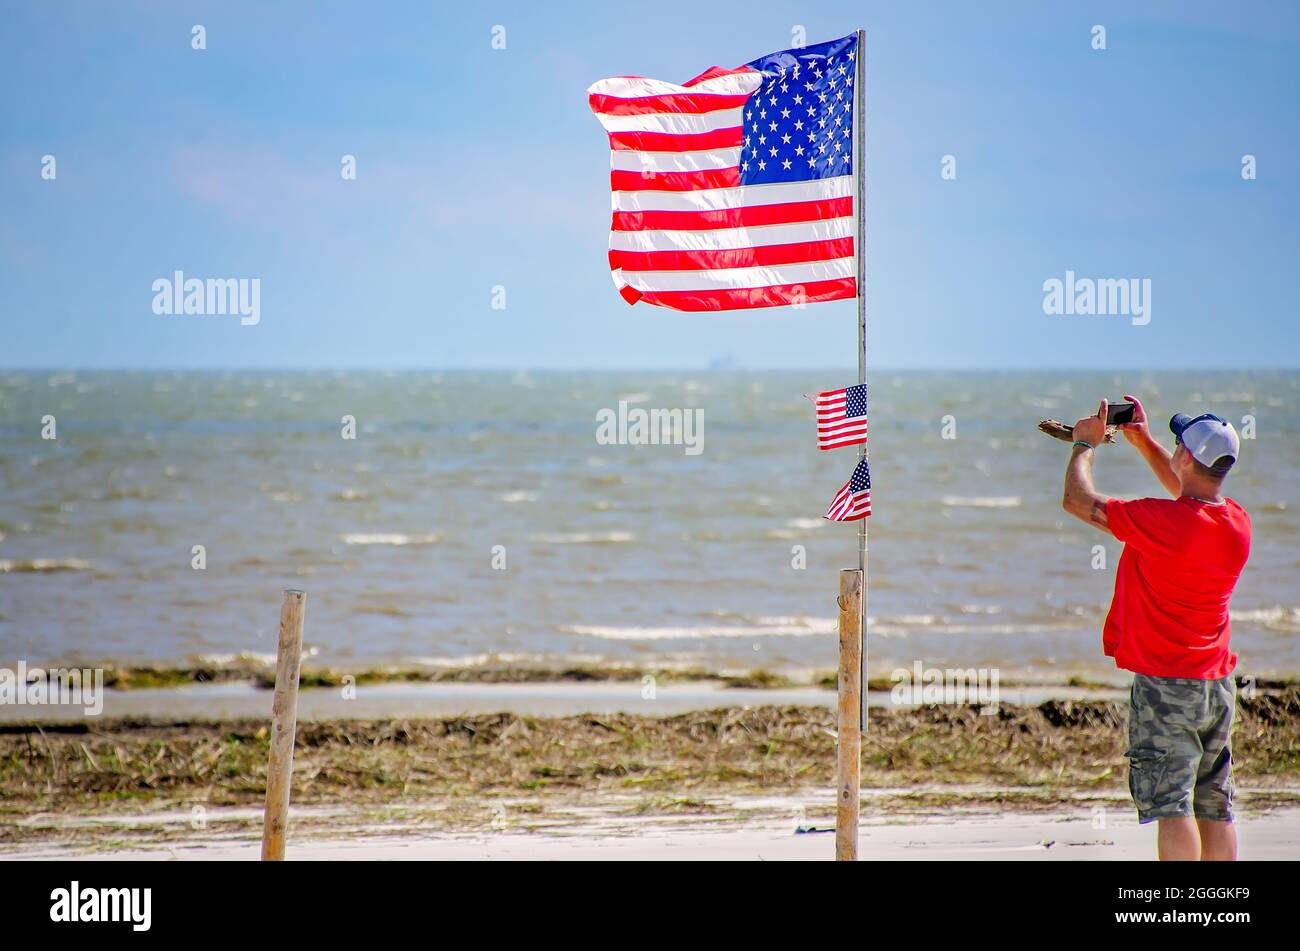 A man uses his cellular phone to photograph an American flag amid debris on the beach after Hurricane Ida, Aug. 31, 2021, in Gulfport, Mississippi. Stock Photo